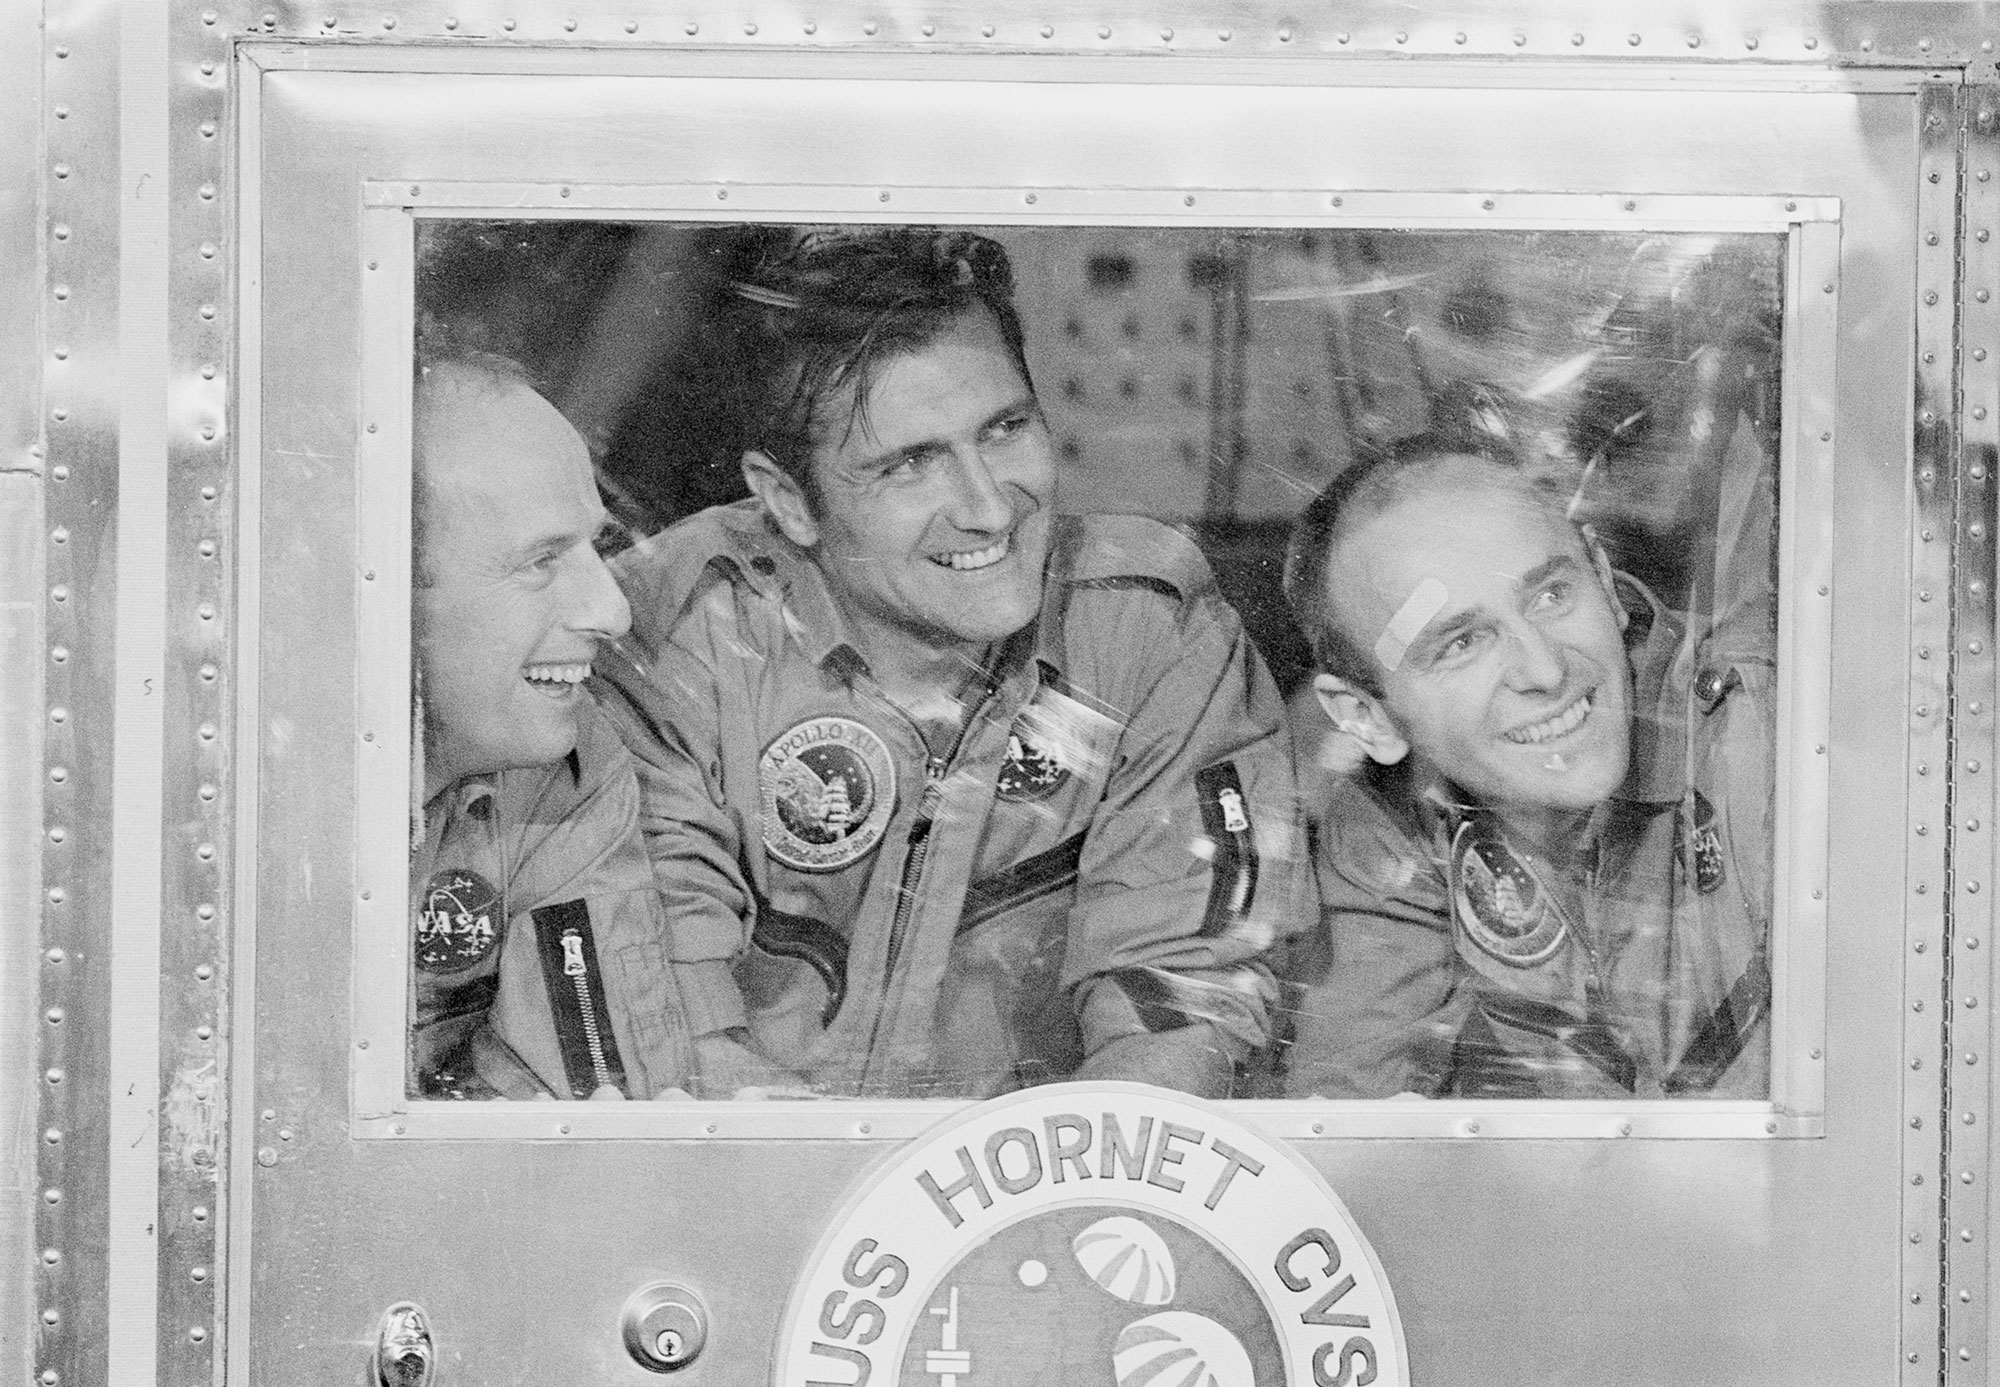 A black and white photograph shows three men smiling from the other side of a ship's window